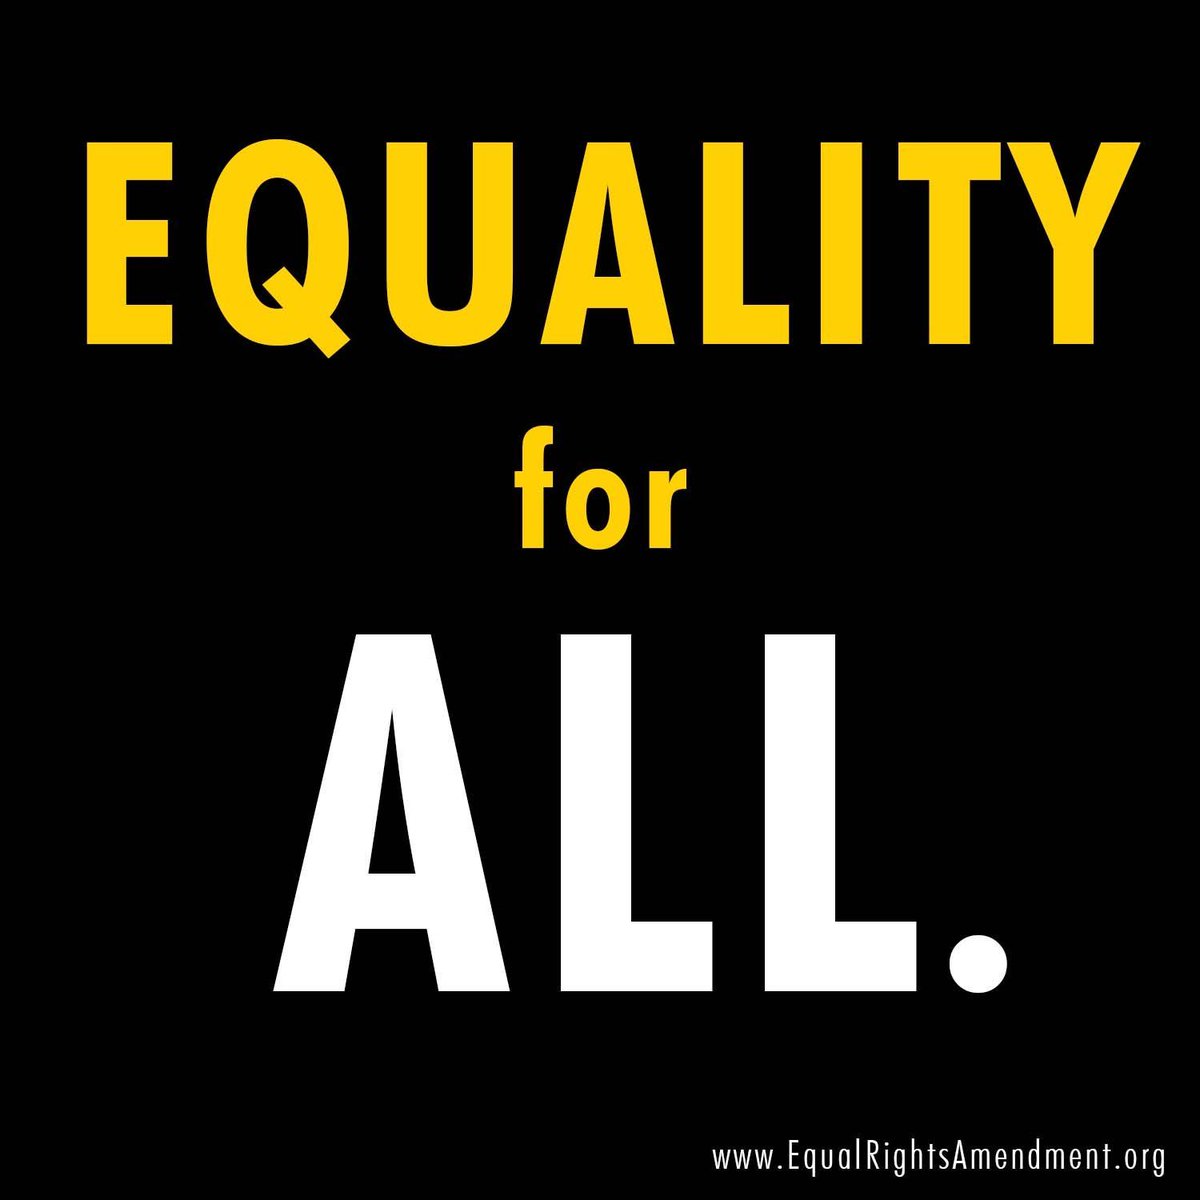 Support equality for all by supporting the ERA! #CNYNOW#ERA #ERANOW #EqualRightsAmendment #EqualRights #Equality #EqualAccess